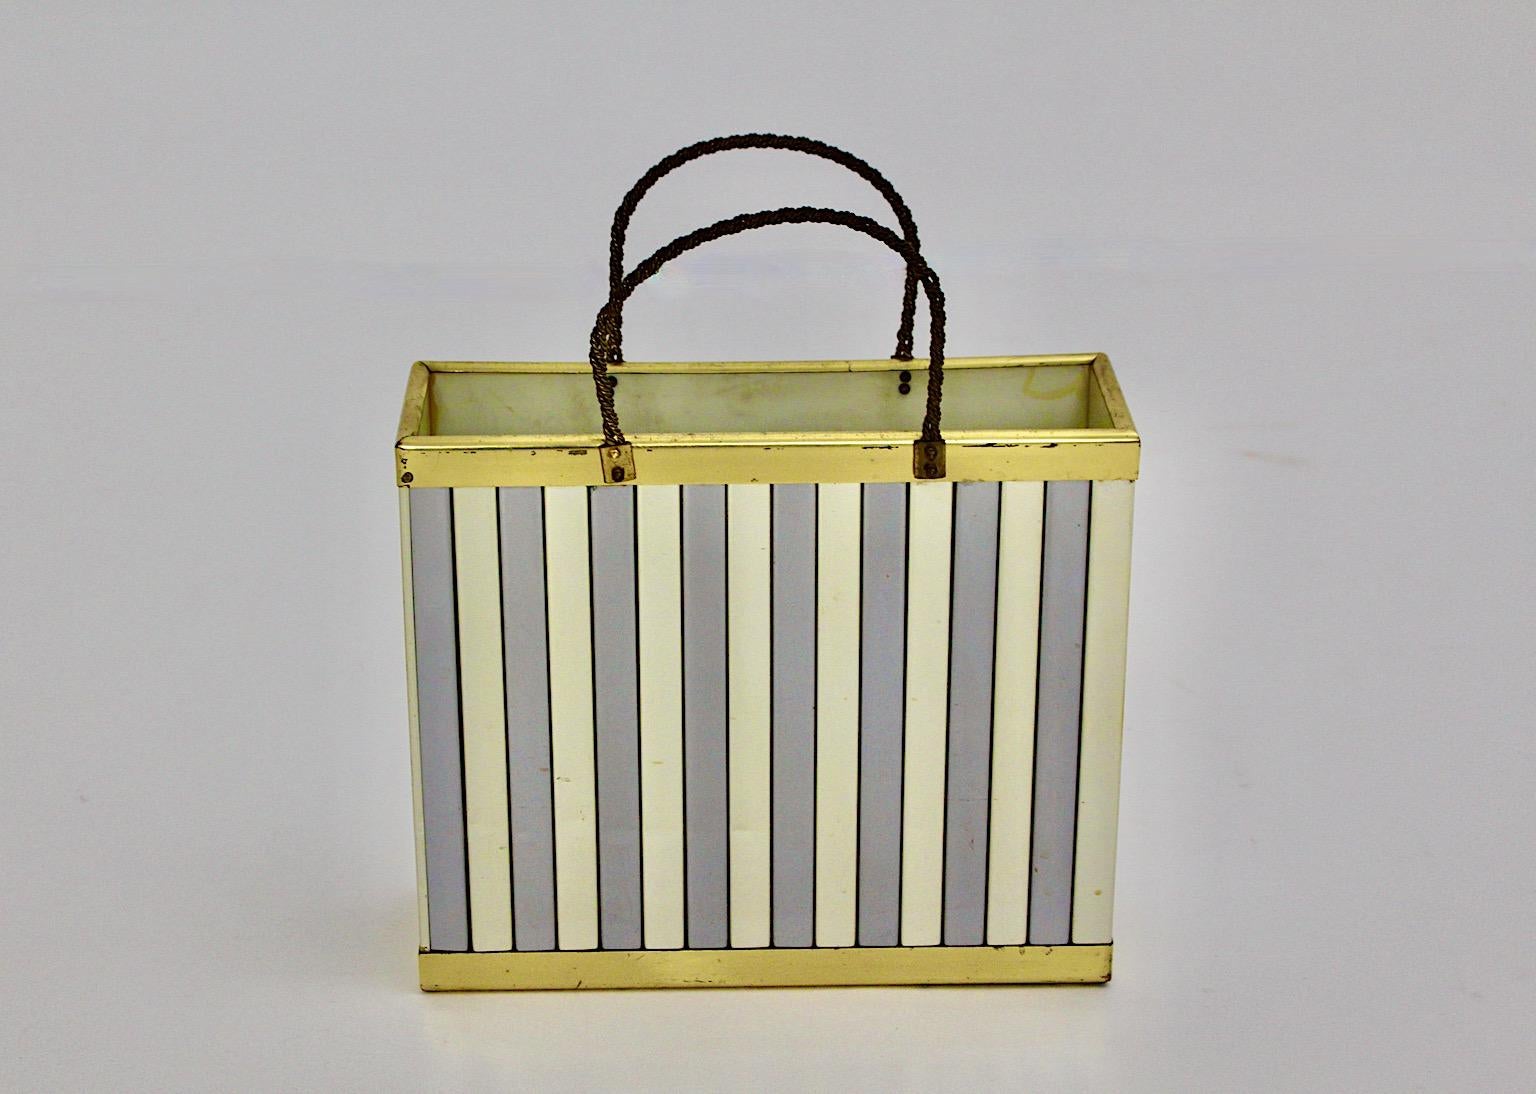 Modern vintage newspaper rack or magazine rack Romeo Rega Style from chromed and brassed metal with braided brass handles, which was designed and manufactured in Italy, 1970s.
Amazing shape like a shopping bag.
Linear structure of the metal